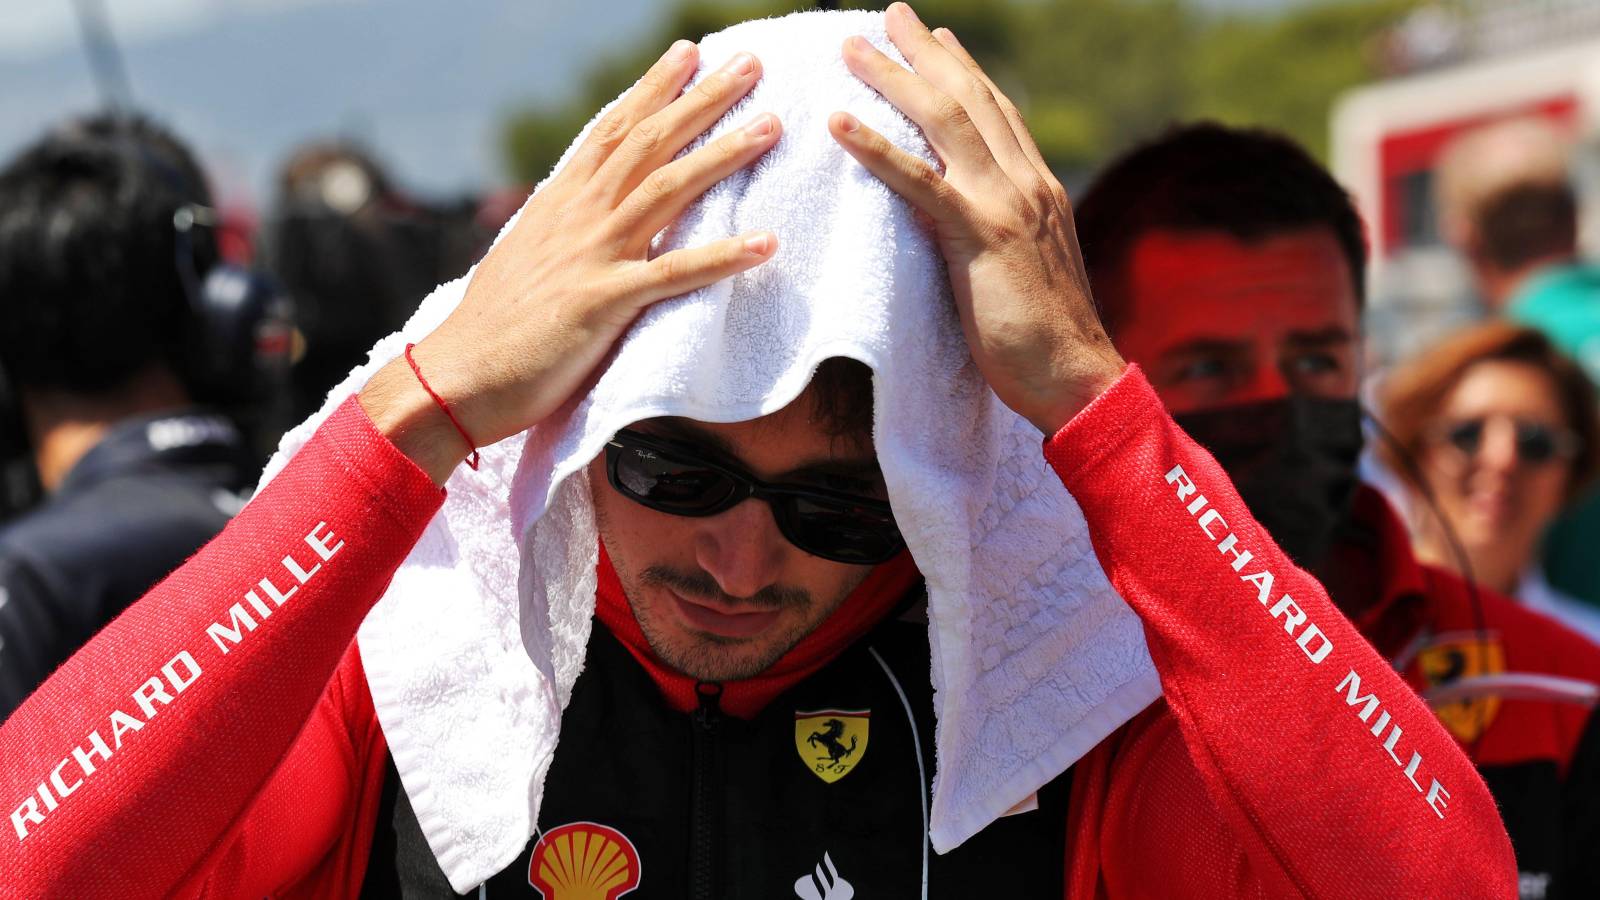 Charles Leclerc, Ferrari, holds a towel on his head. France, July 2022.